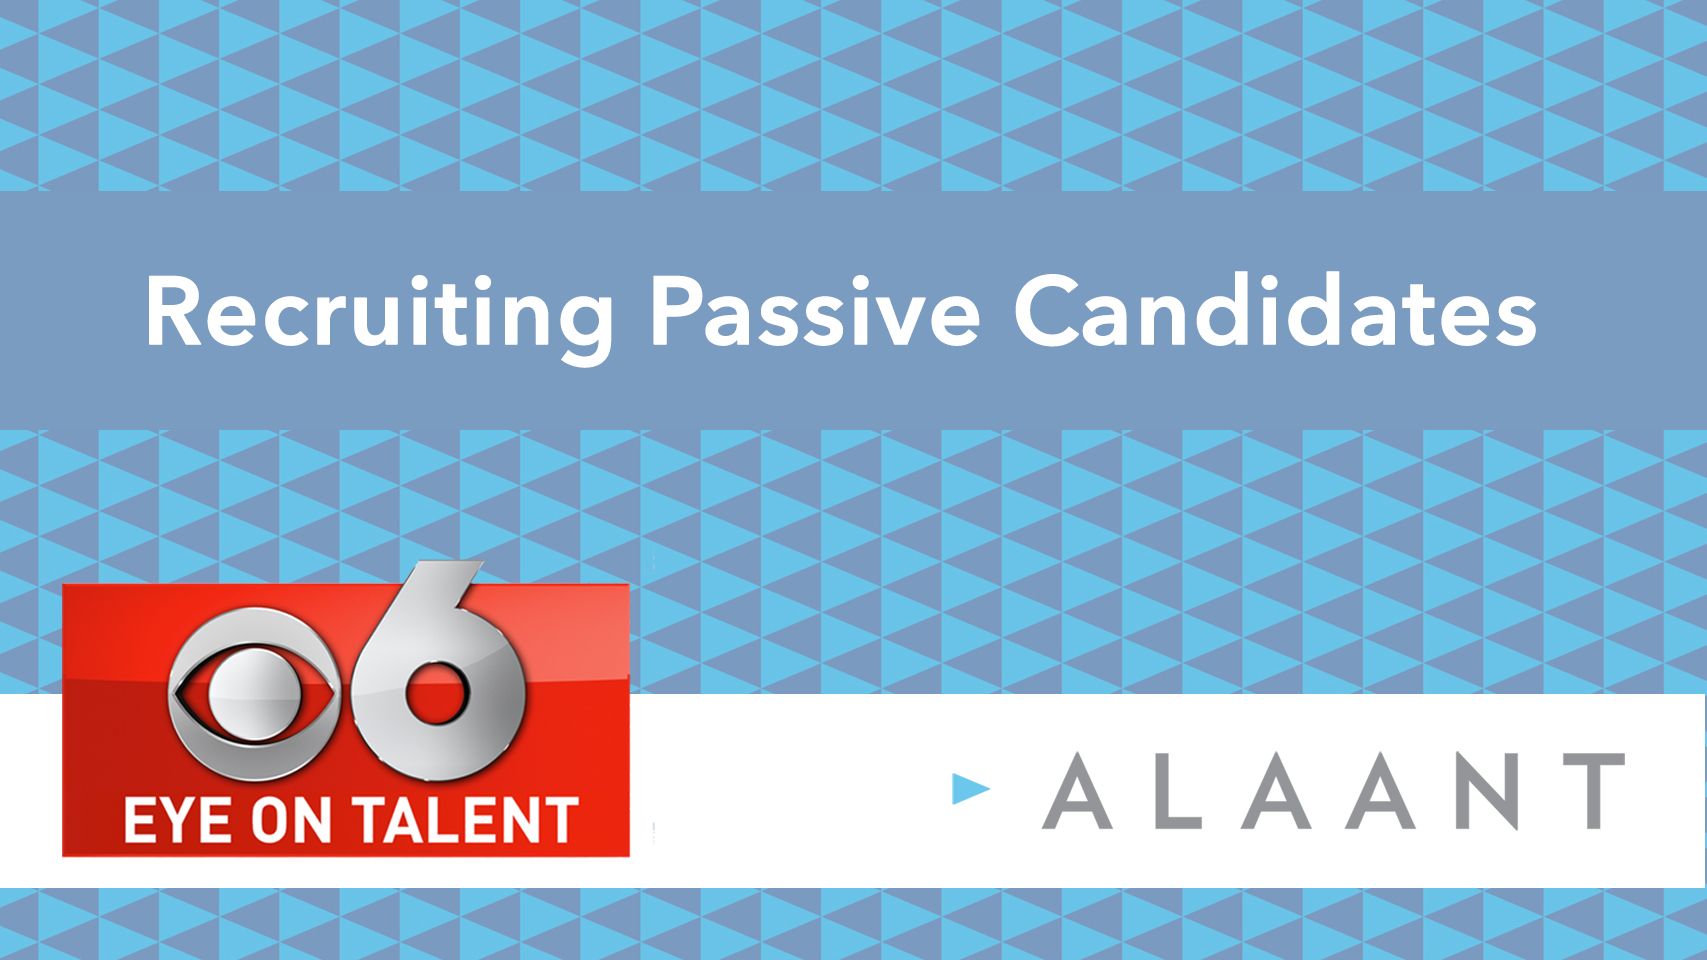 Alaant Eye on Talent Recruiting Passive Candidates